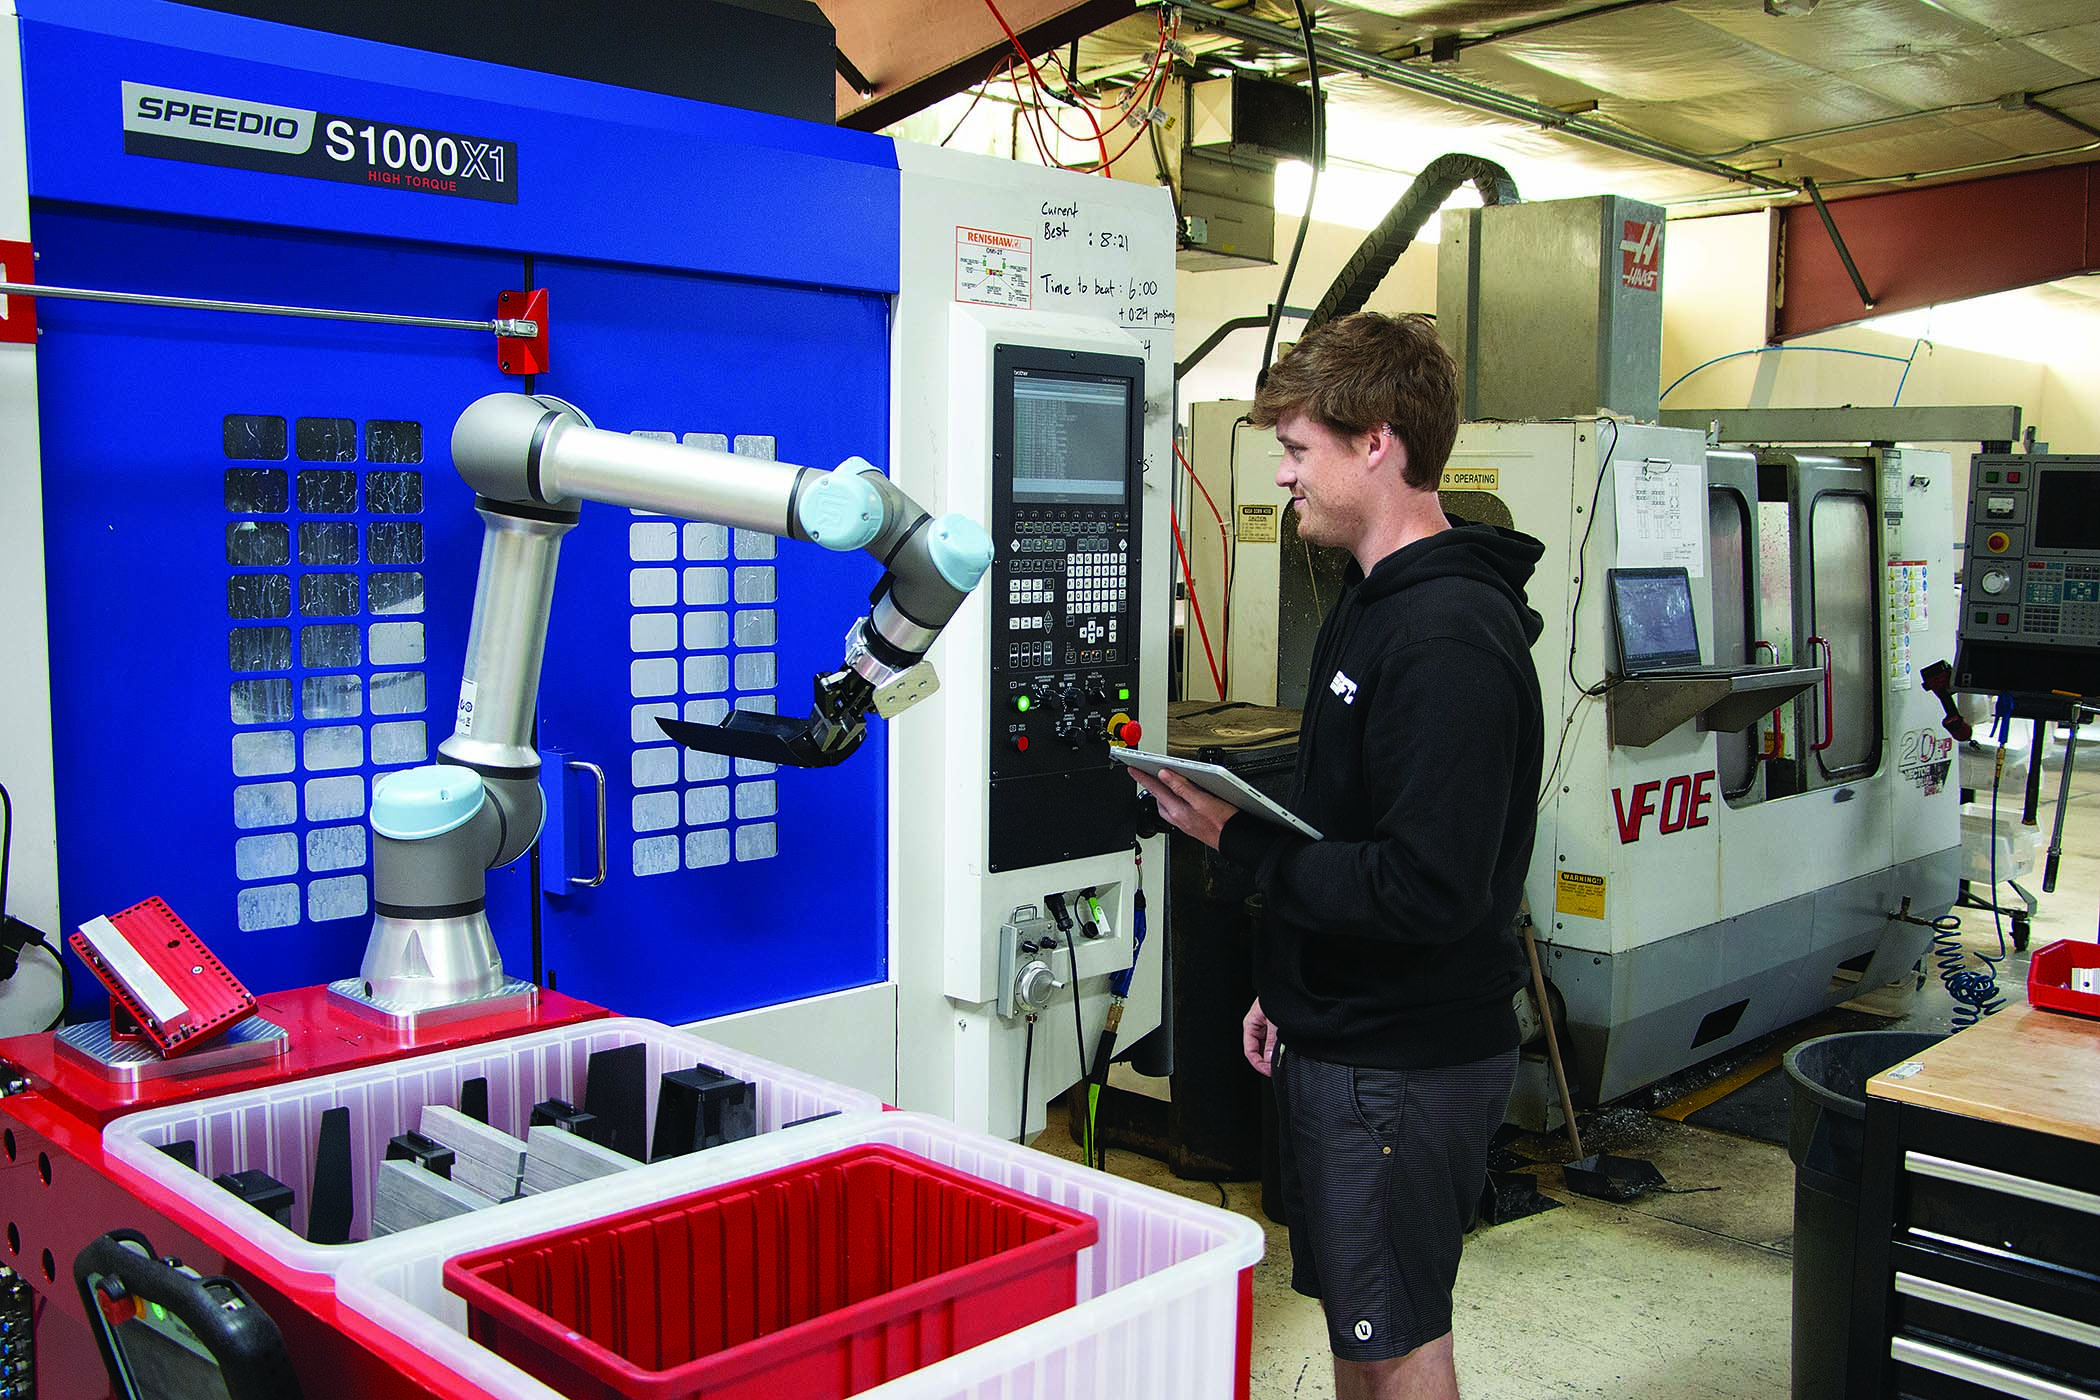 With Go Fast Campers’ experience in replicating successful, reliable and fully integrated cobot-tended machining cells, the manufacturer is developing a new business to help other entrepreneurial companies with automation. Pictured is Ian Sparkman, special projects team engineer.